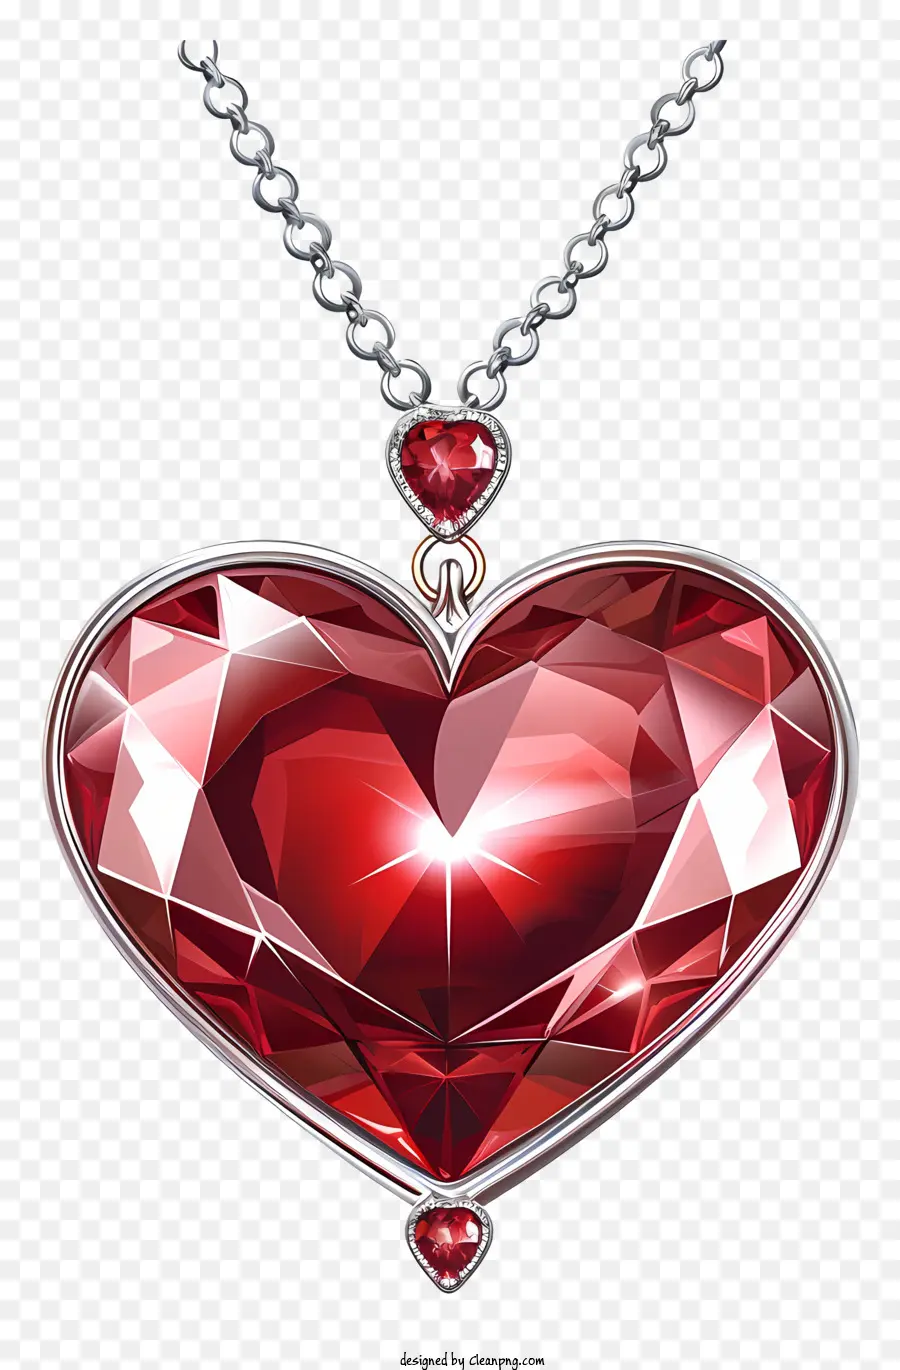 valentine's day jewelry heart-shaped gemstone silver chain necklace red gemstone shiny and sparkly jewelry